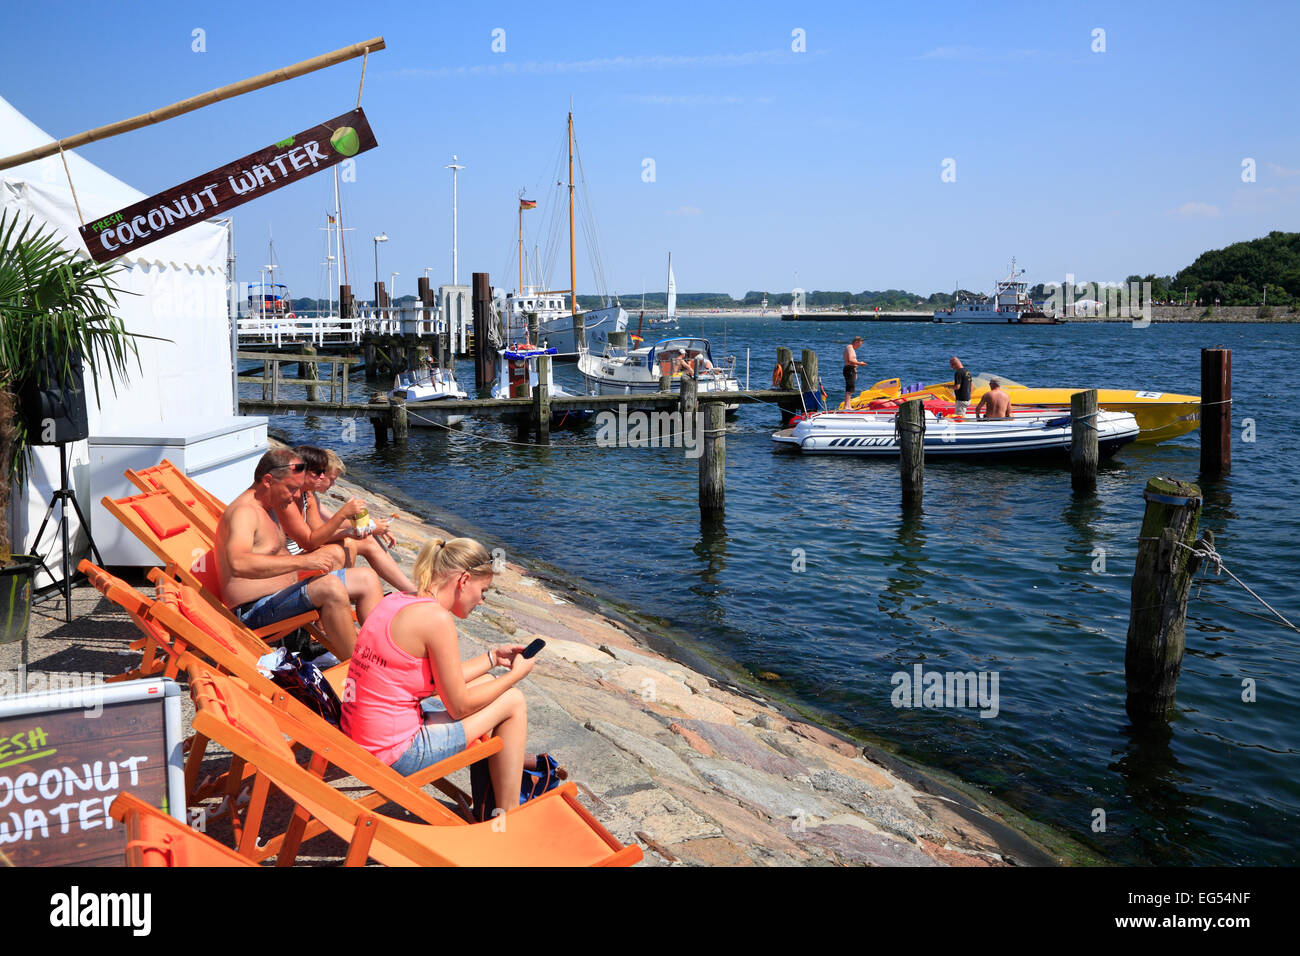 Bar at river Trave, Travemuende, Baltic Sea coast,  Schleswig-Holstein, Germany, Europe Stock Photo